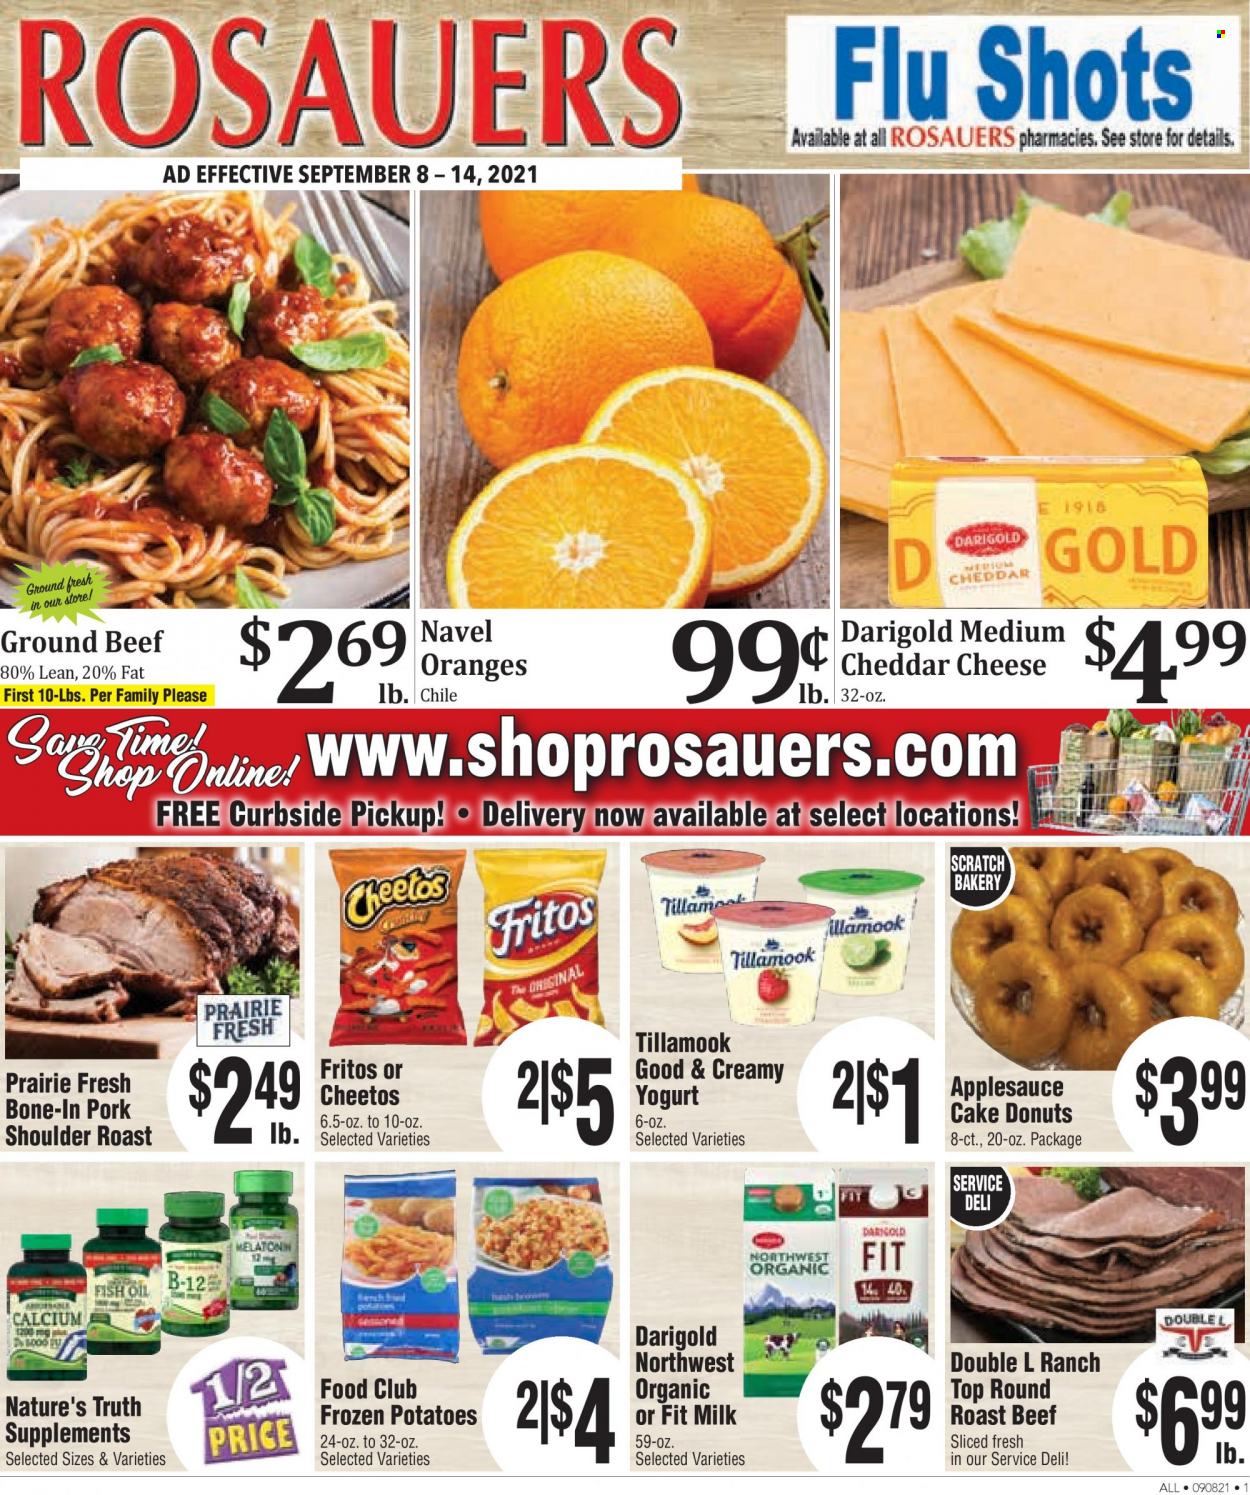 thumbnail - Rosauers Flyer - 09/08/2021 - 09/14/2021 - Sales products - cake, donut, potatoes, oranges, cheddar, cheese, yoghurt, milk, Fritos, Cheetos, oil, apple sauce, beef meat, ground beef, round roast, roast beef, pork meat, pork roast, pork shoulder, calcium, fish oil, Nature's Truth, navel oranges. Page 1.